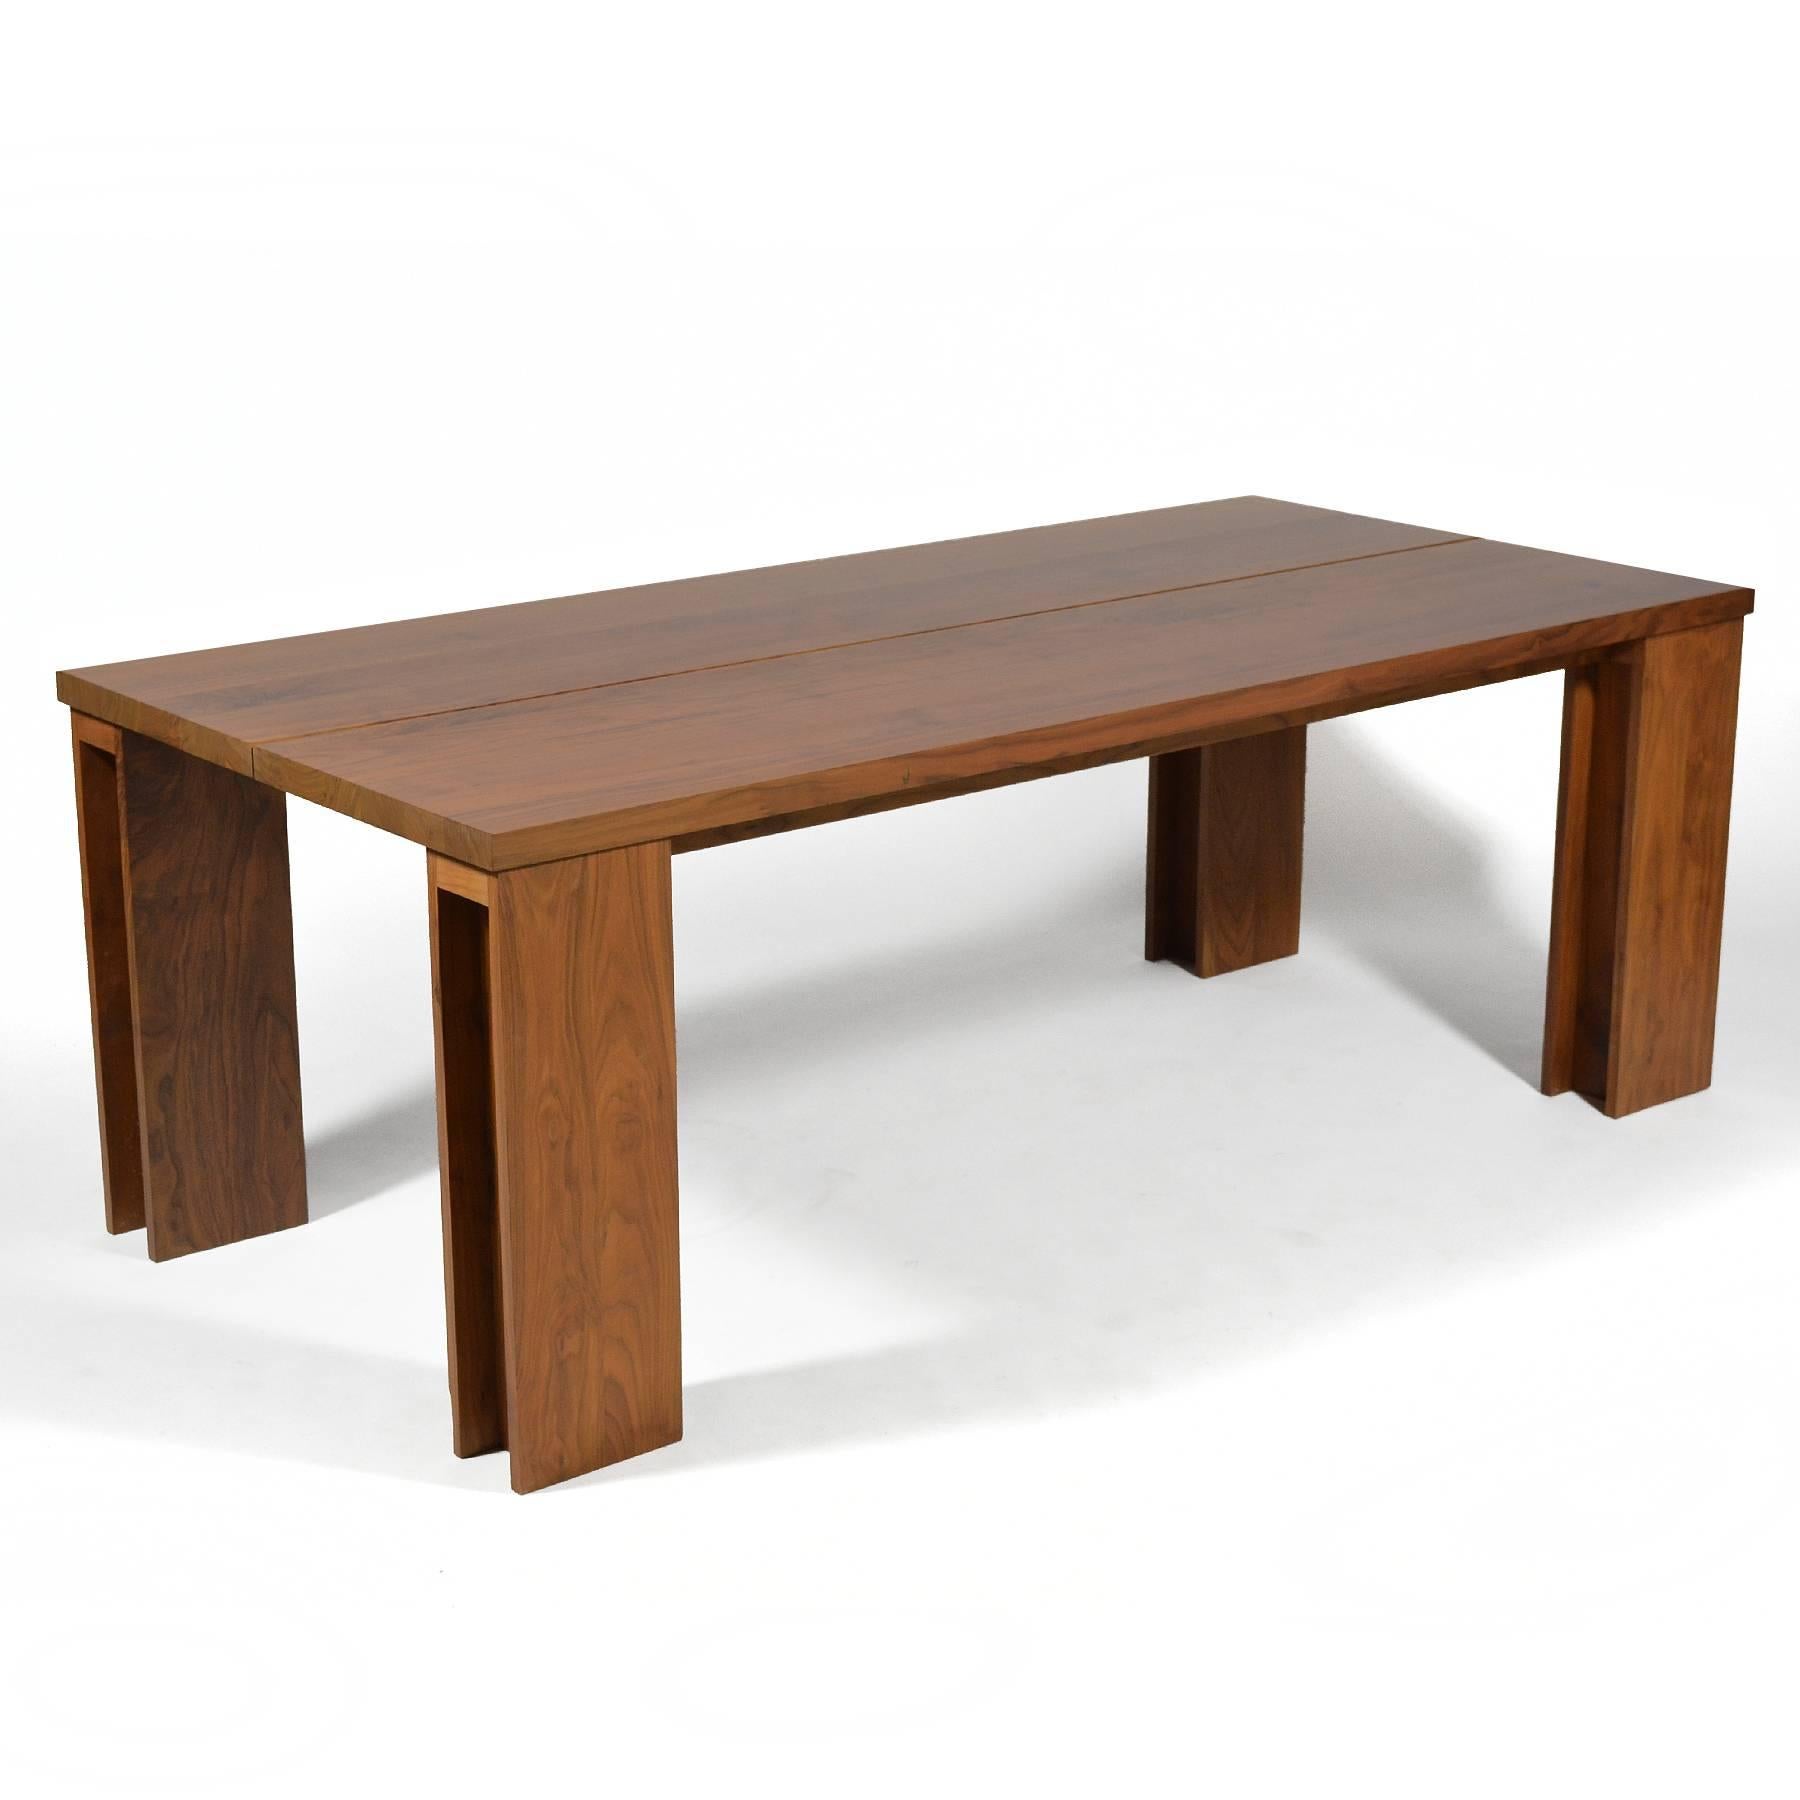 This exceptional table by De La Espada is crafted of rich, solid American black walnut. The model 538 design is also called the 